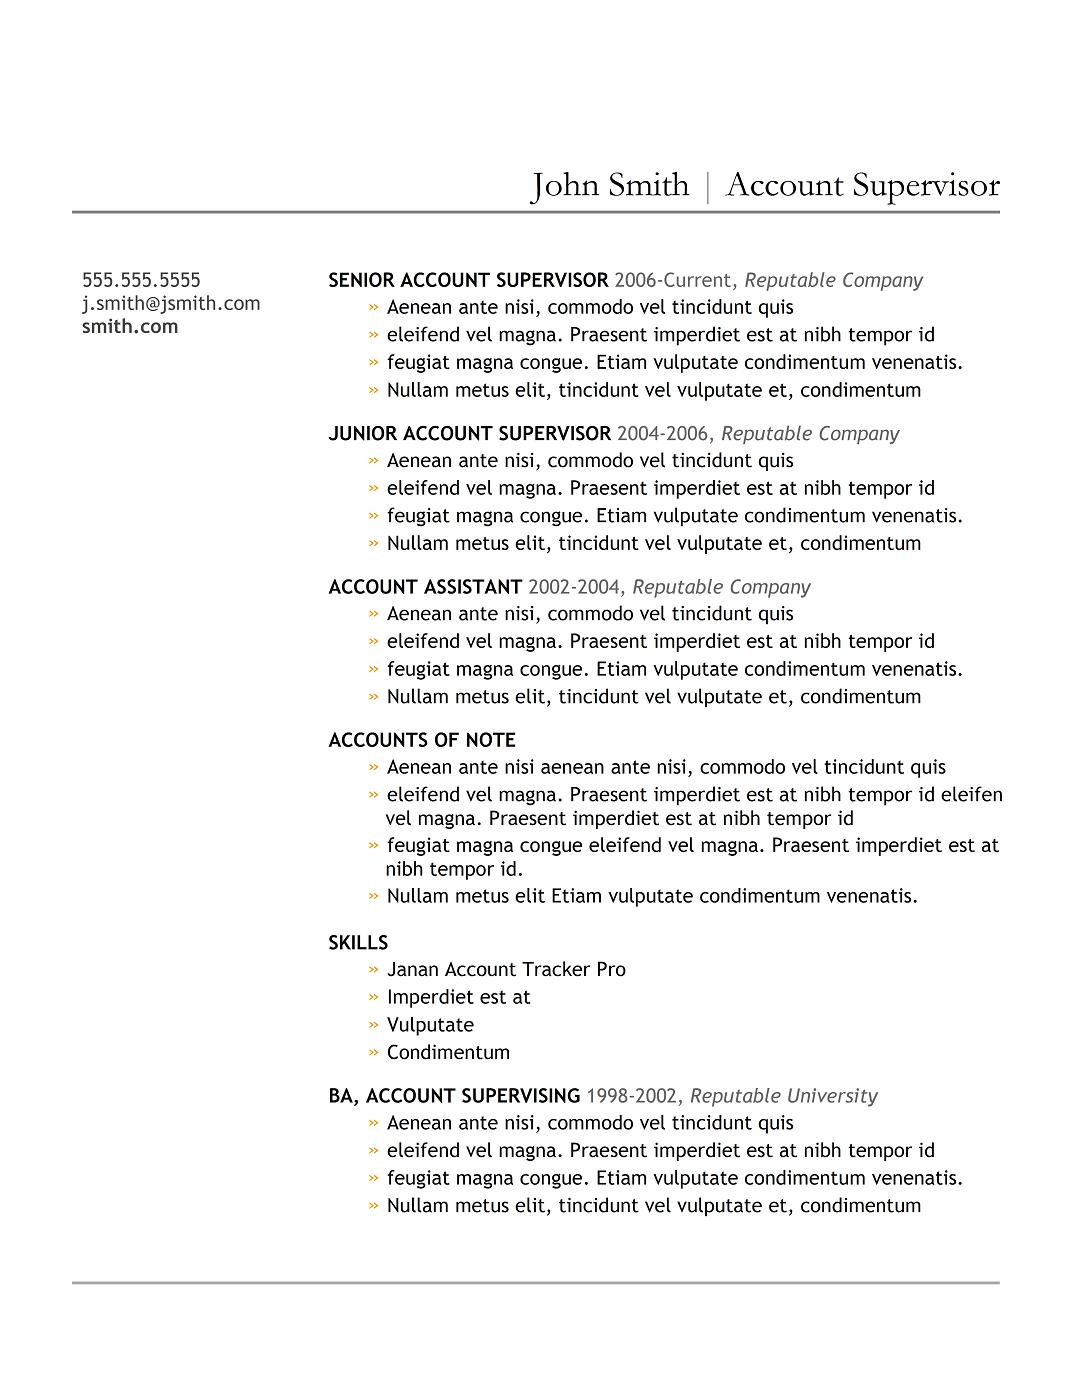 Account it manager recruiting resume